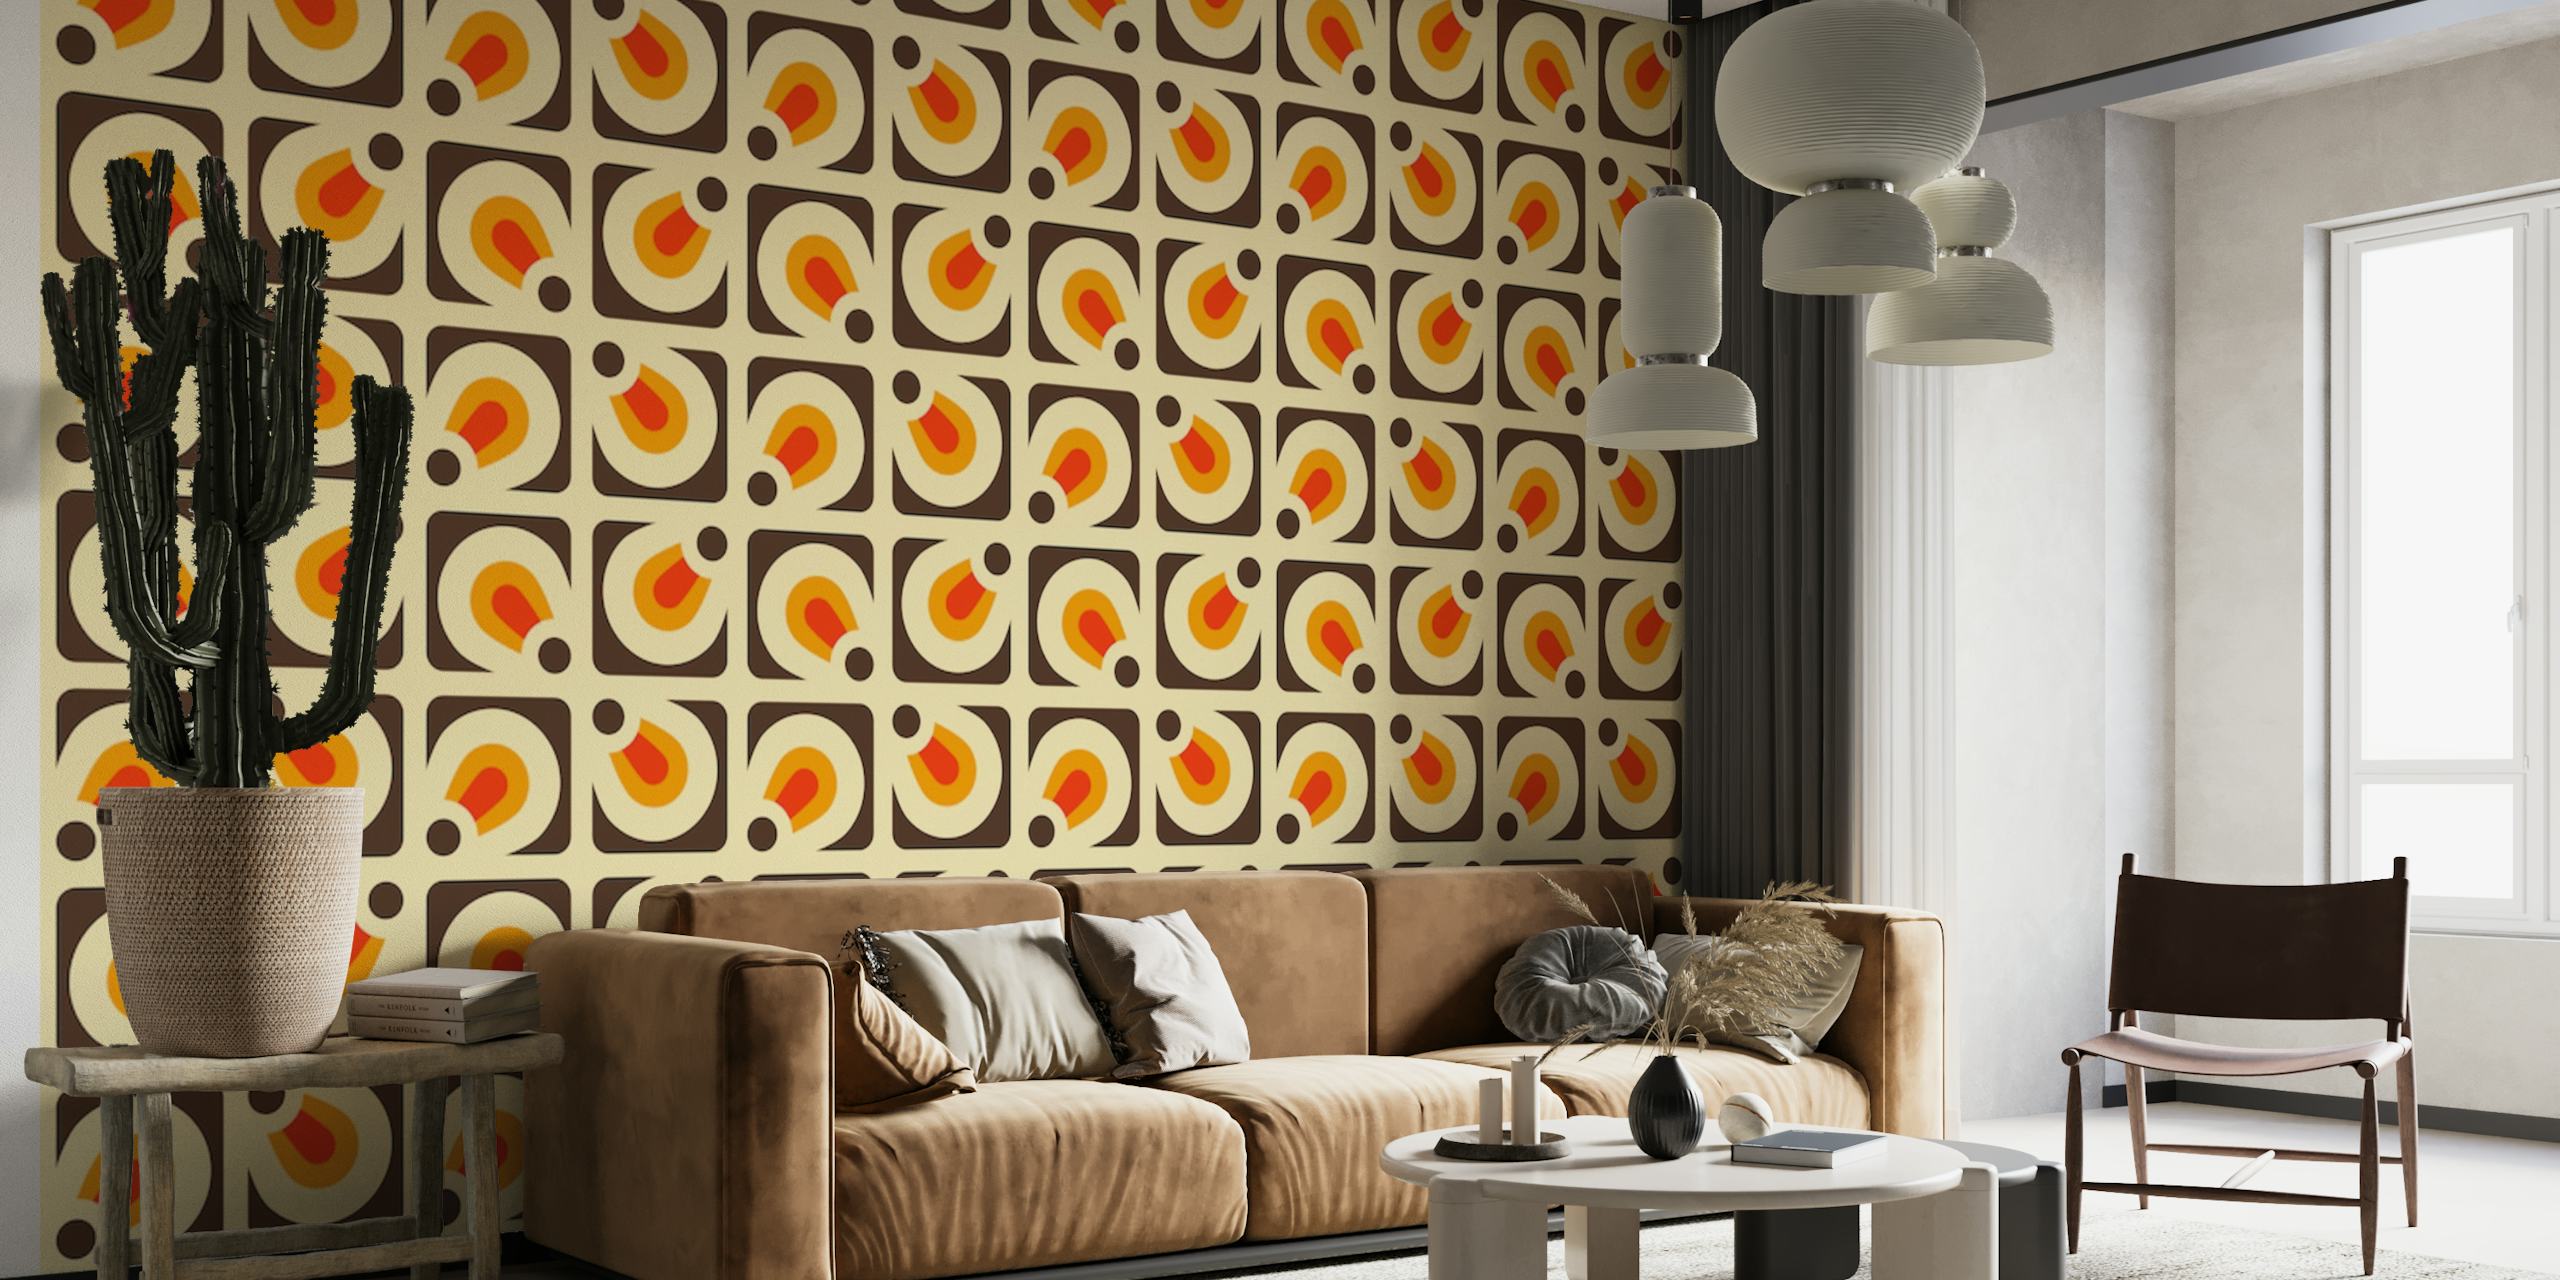 Vintage inspired '2146 Retro Pattern' wall mural with orange and white geometric shapes